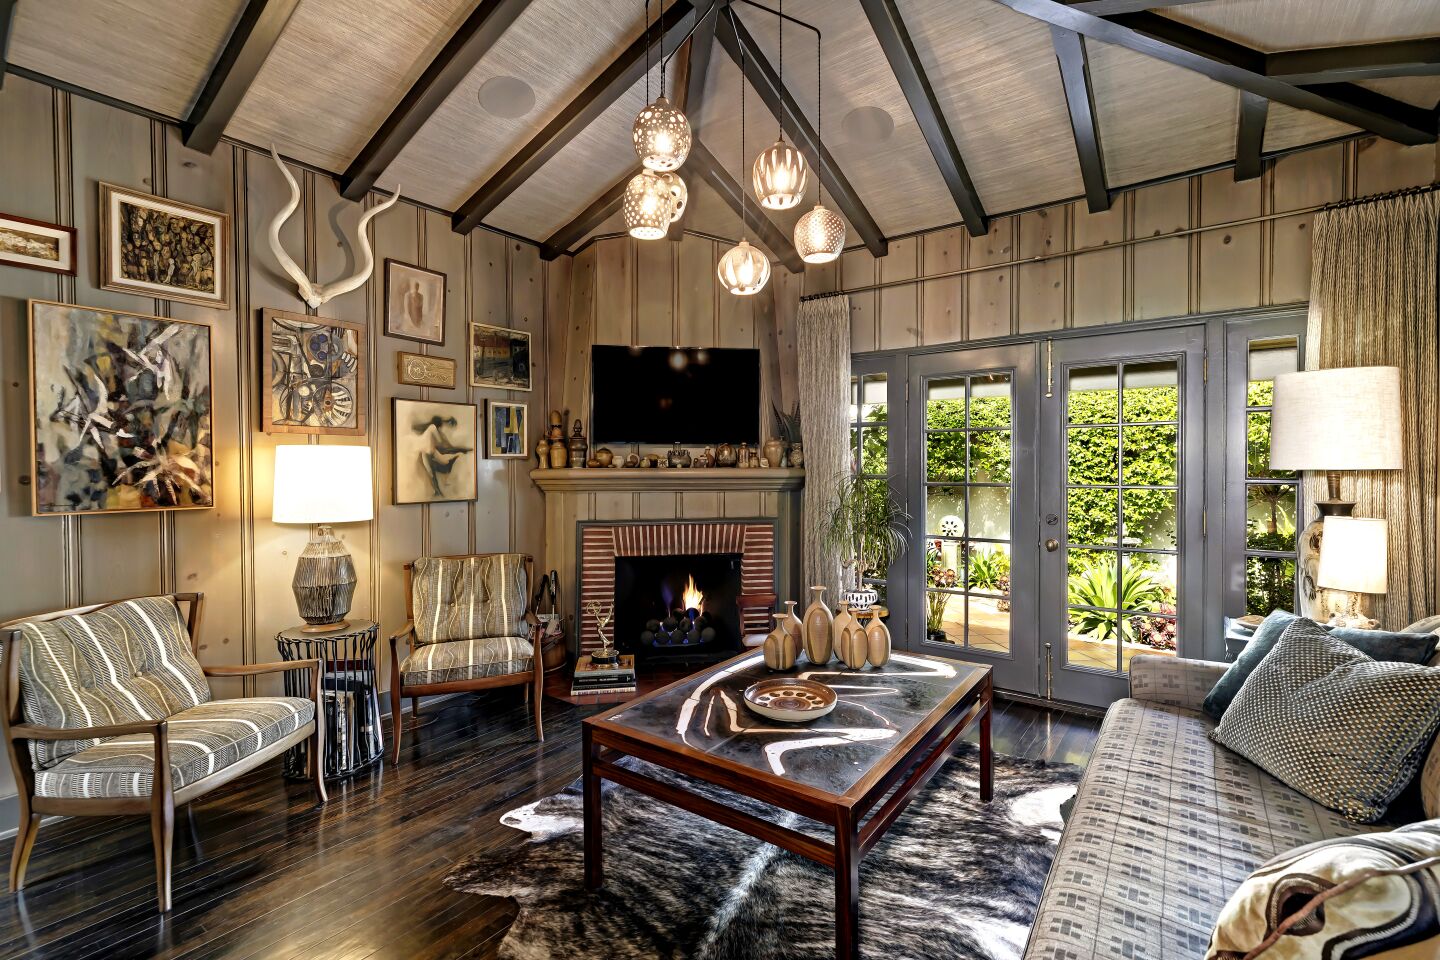 A paneled den with wood-beamed ceilings, brick fireplace and double glass doors leading outside